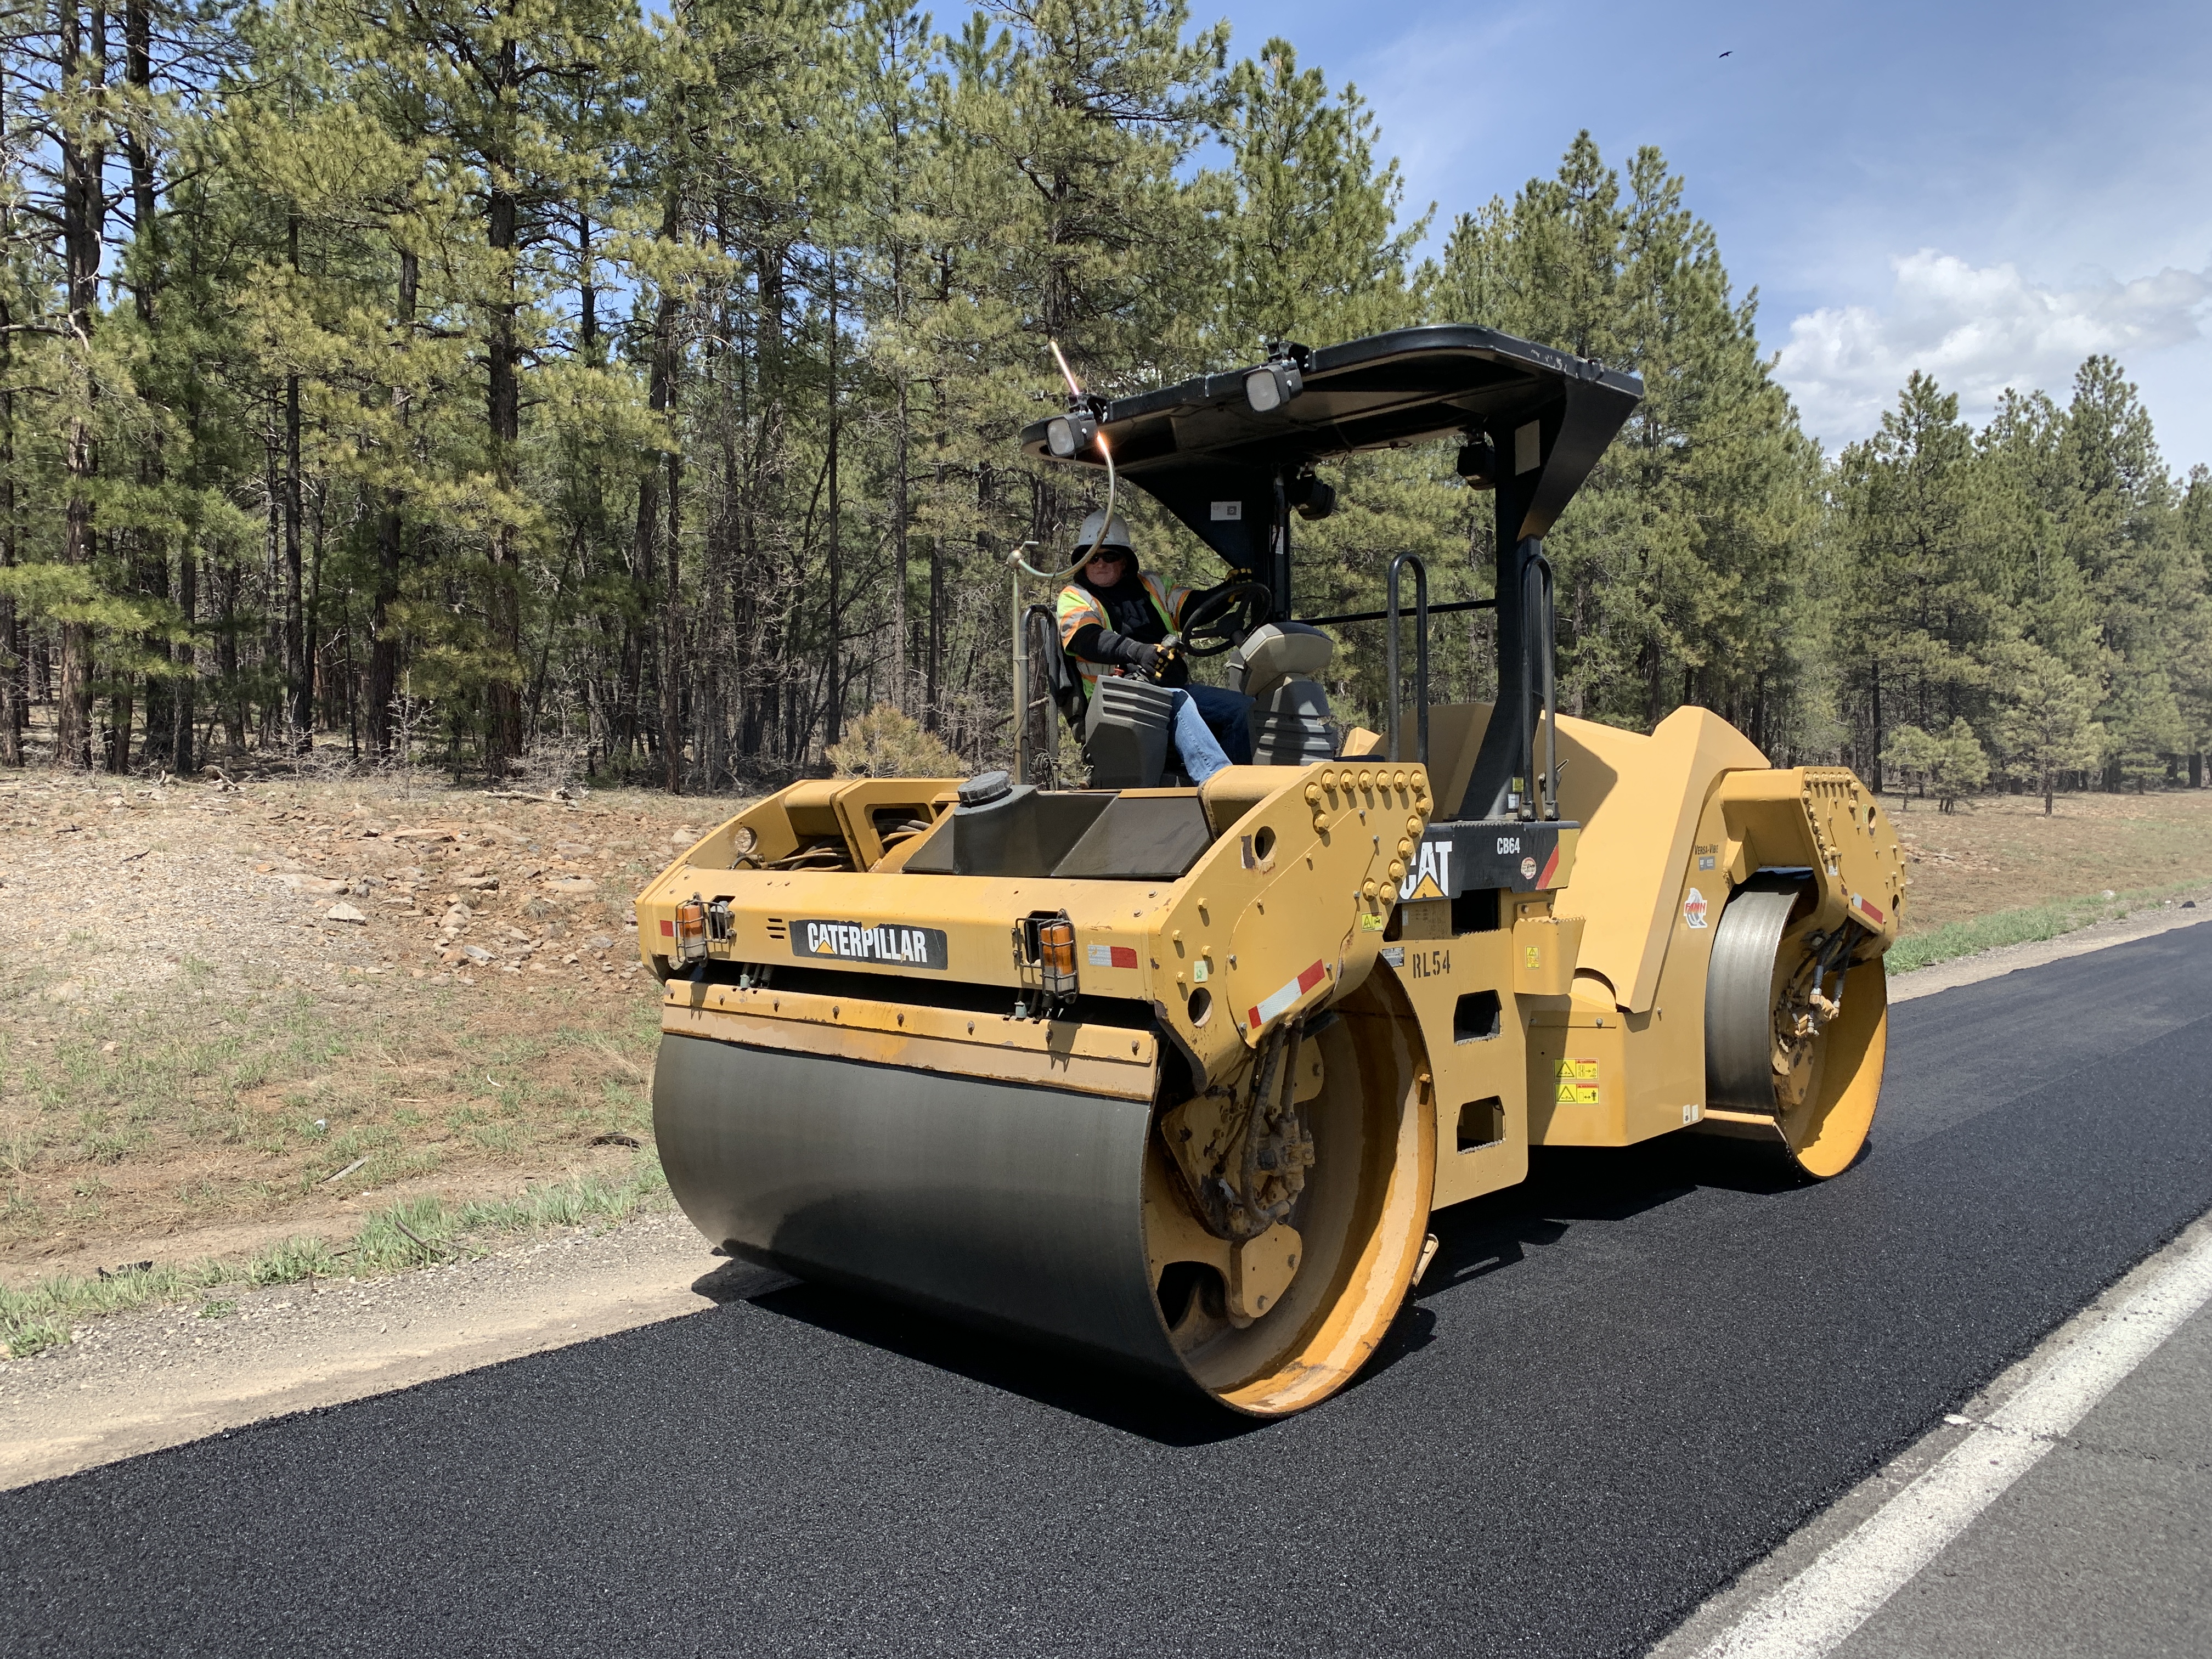 A roller flattens and smooths new asphalt on a highway.